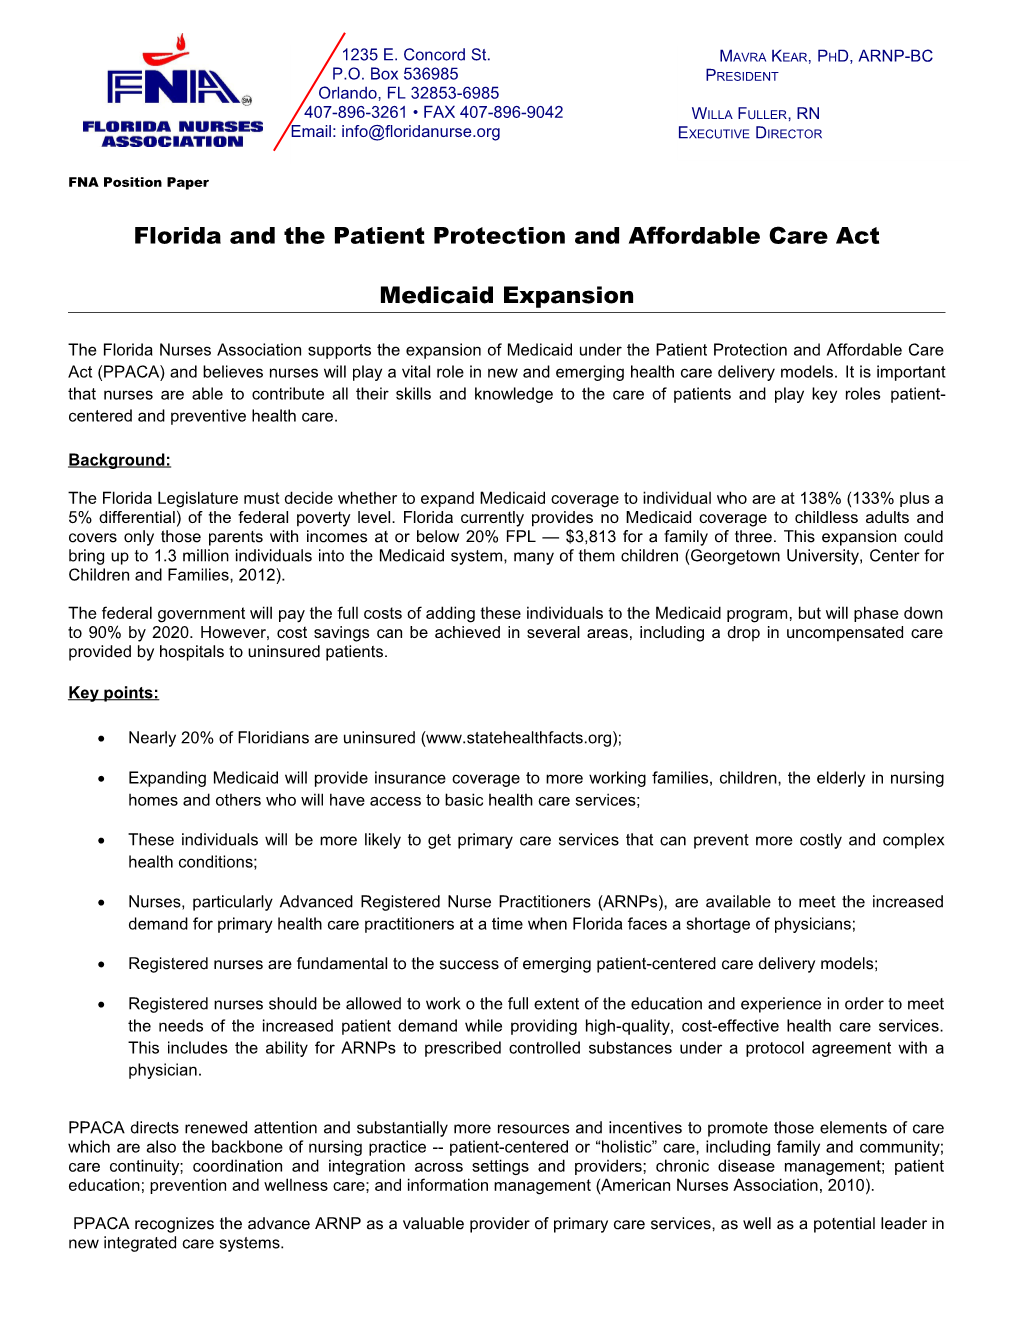 Florida and the Patient Protection and Affordable Care Act